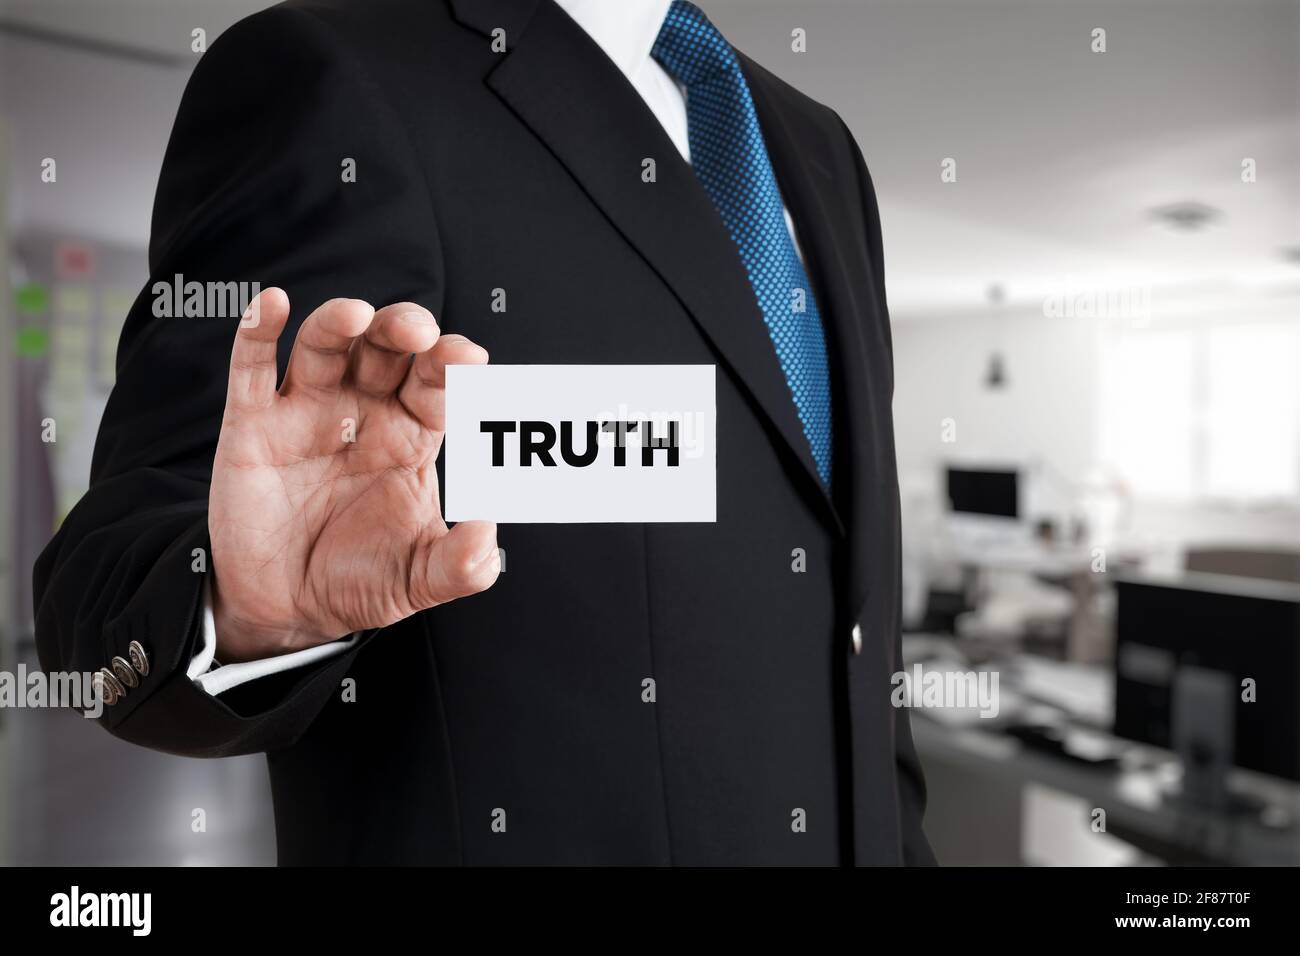 Businessman shows a business card with the word truth. Fact, honesty or ethical values concept. Stock Photo